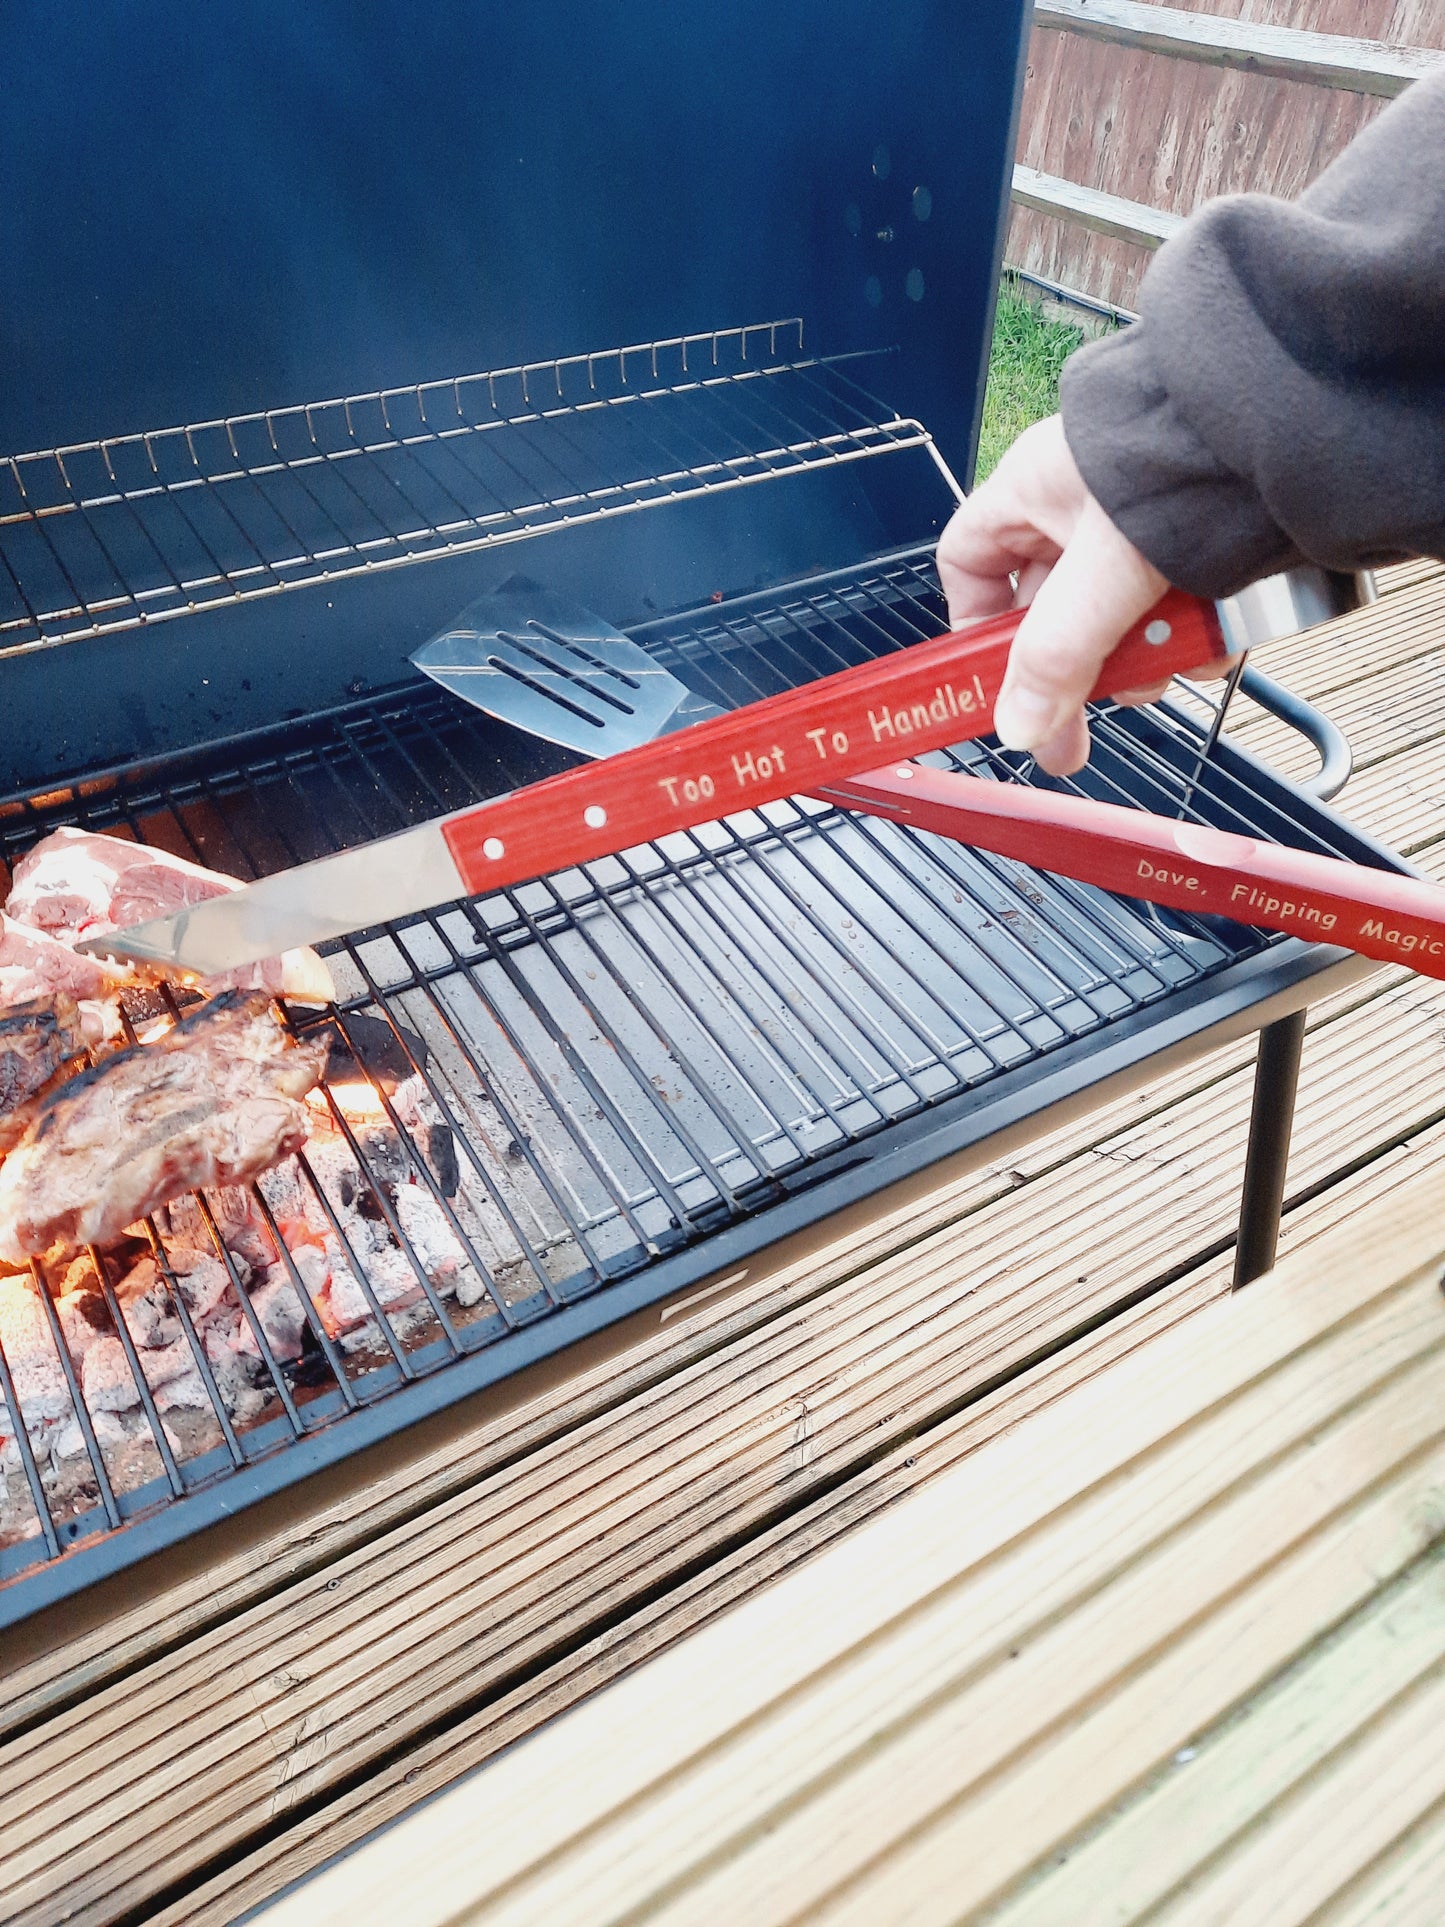 Grilling some pork using a personalised wooden handled tong that says "Too Hot To Handle!" and spatulad that says "Dave Flipping Magician"